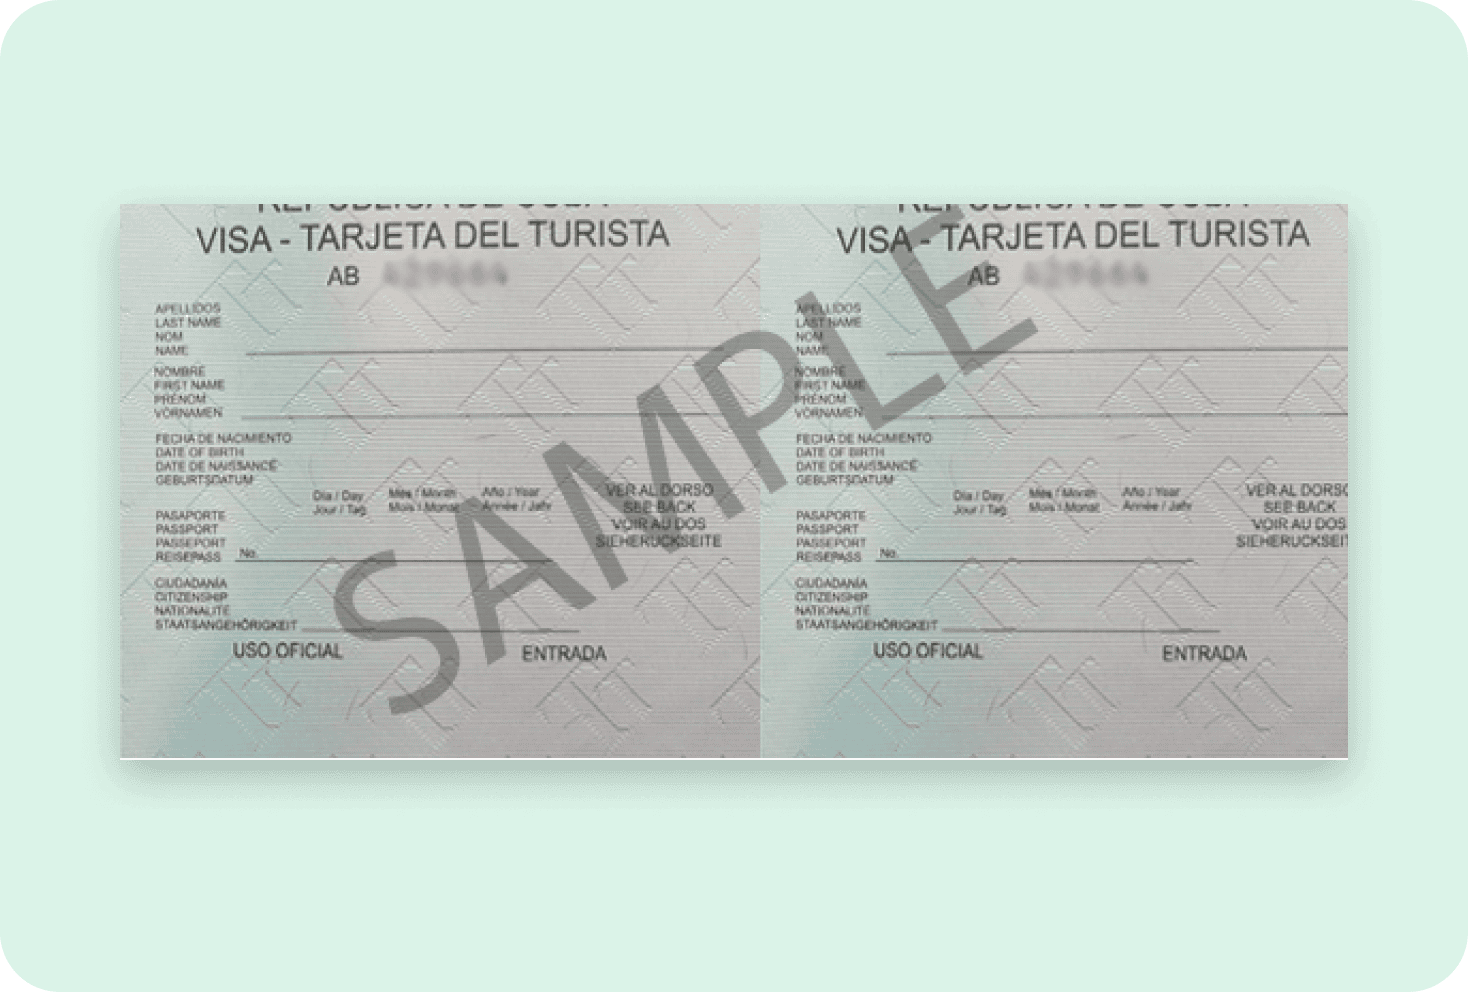 A sample Cuban Visa with watermark and green background